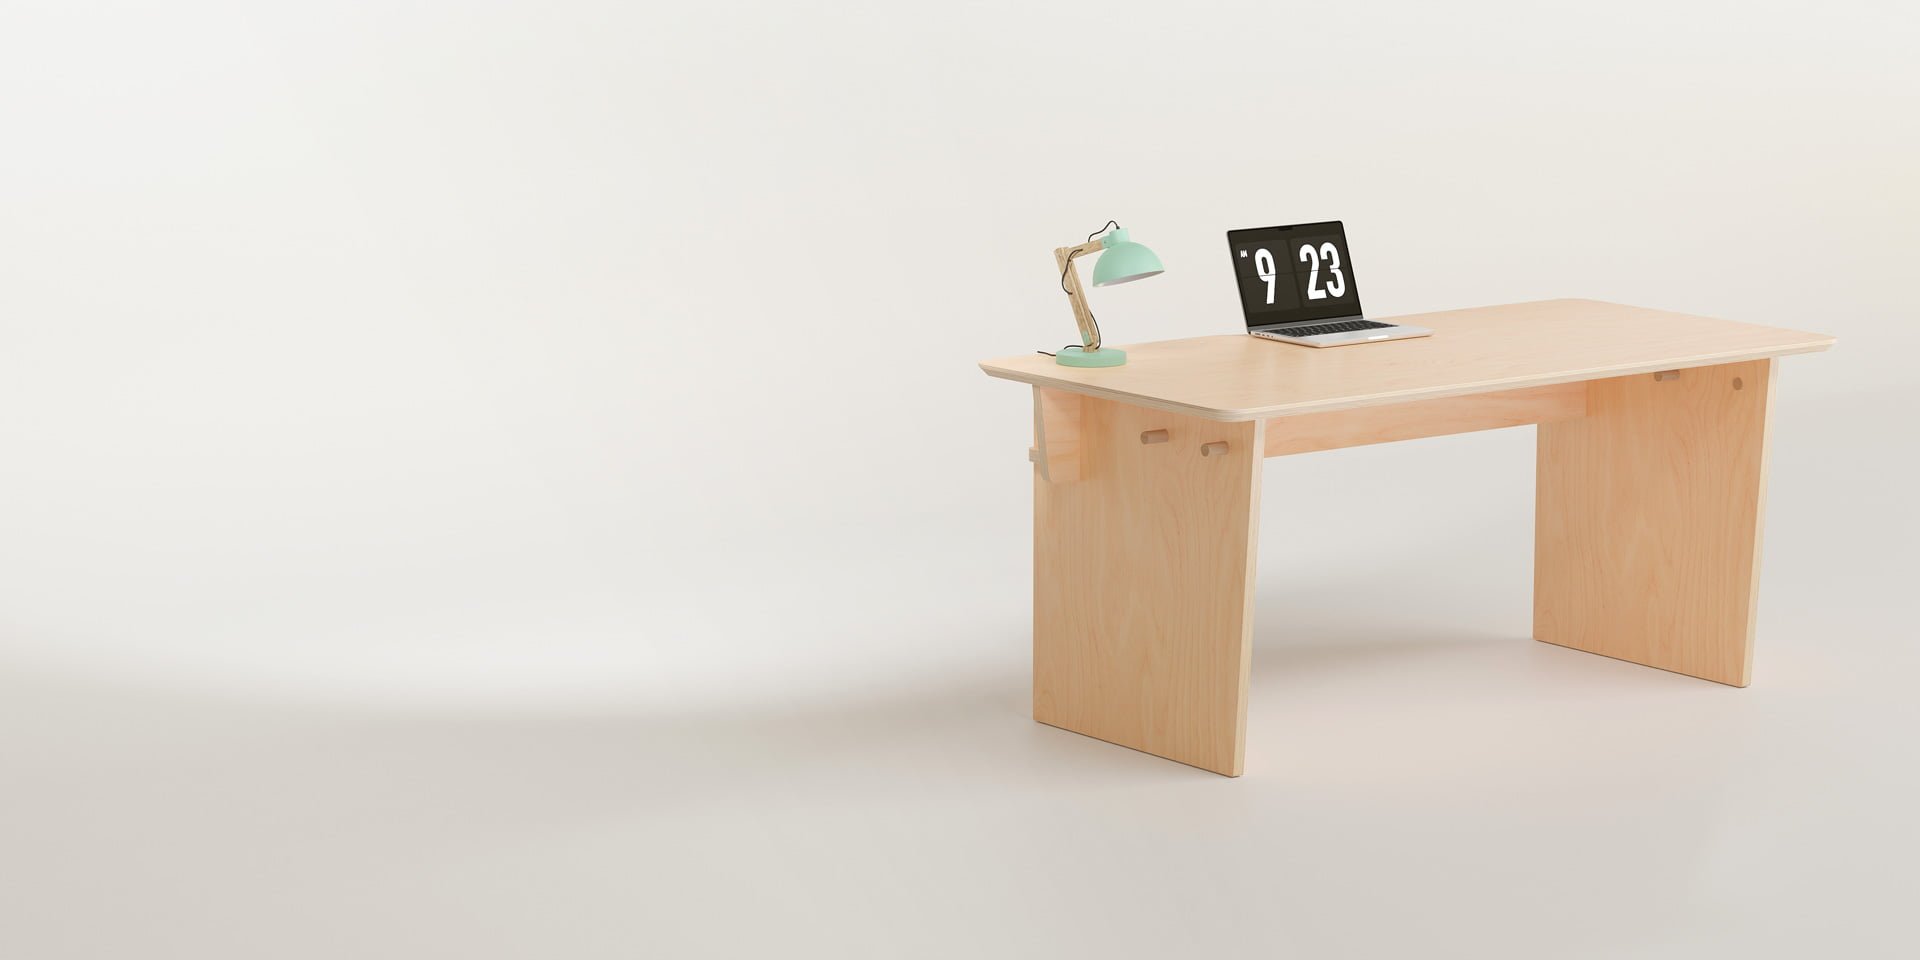 The Ecosium Big desk made from sustainable timber in Australia sitting on a white background with a green desk lamp and an Apple laptop